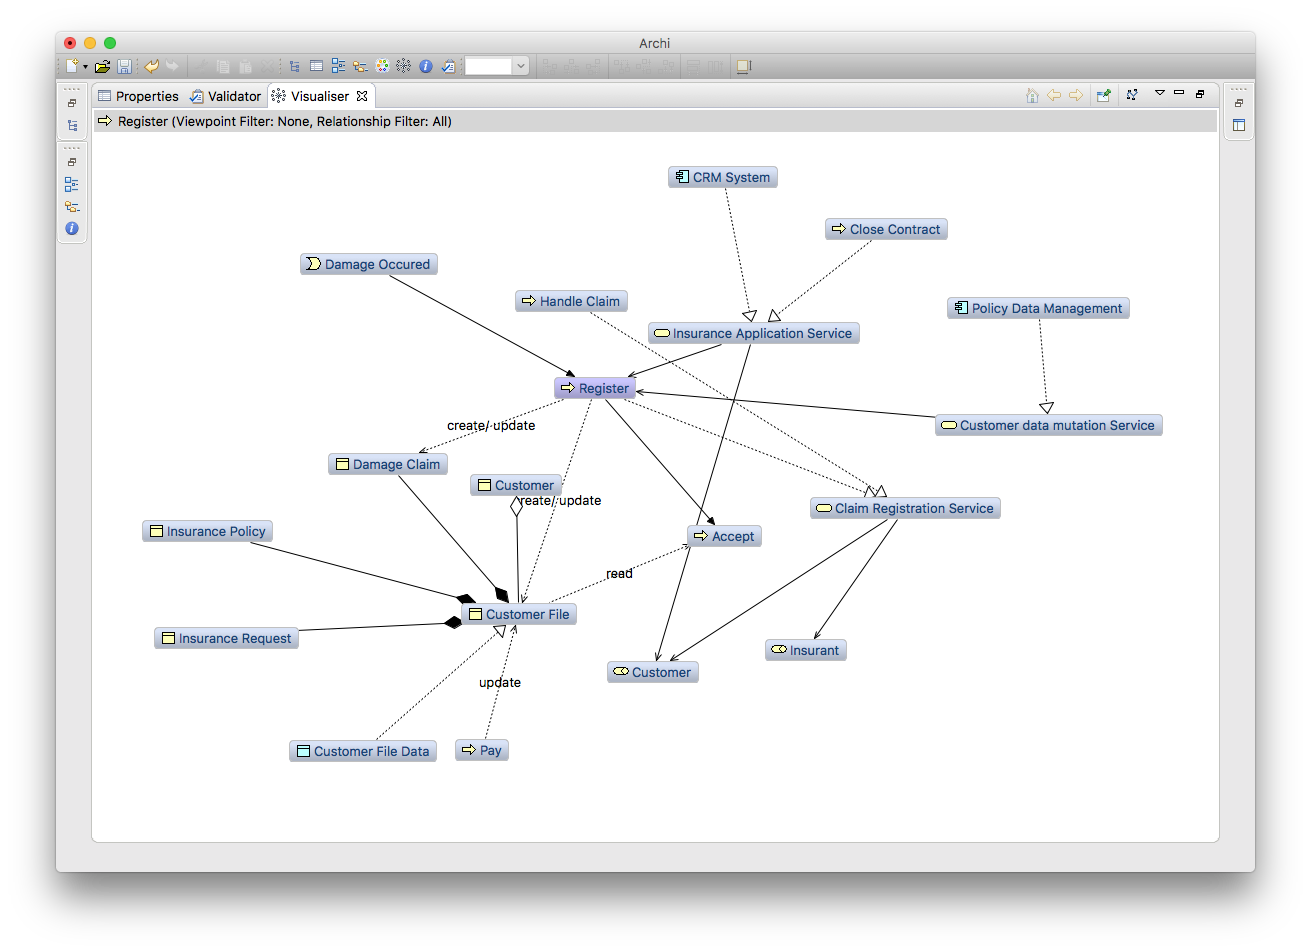 Archi Open Source Archimate Modelling